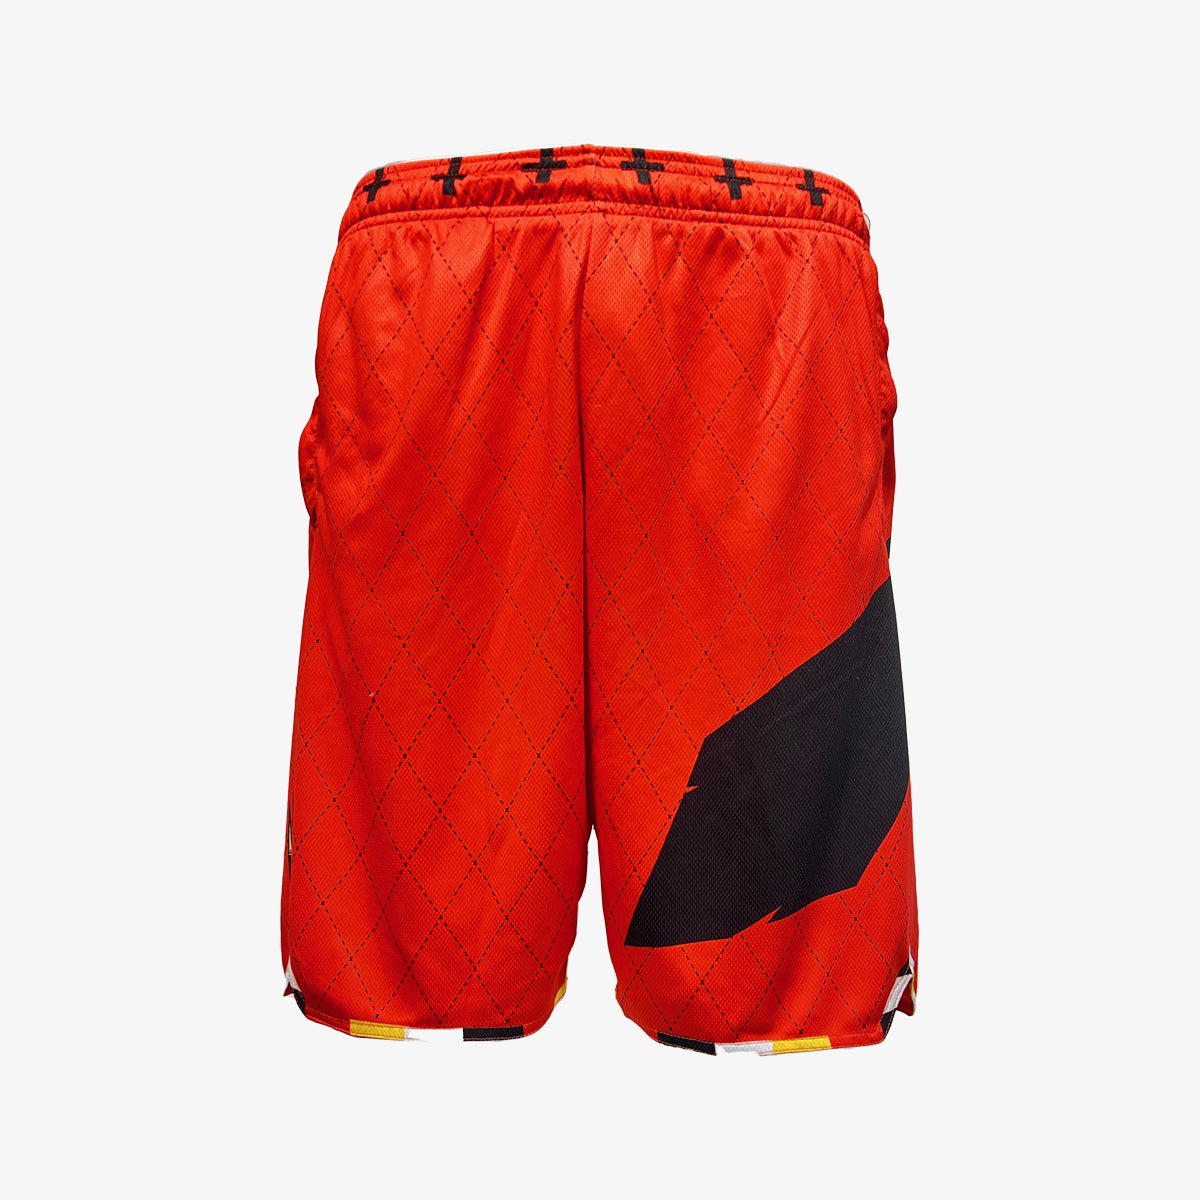 Feather Basketball Shorts